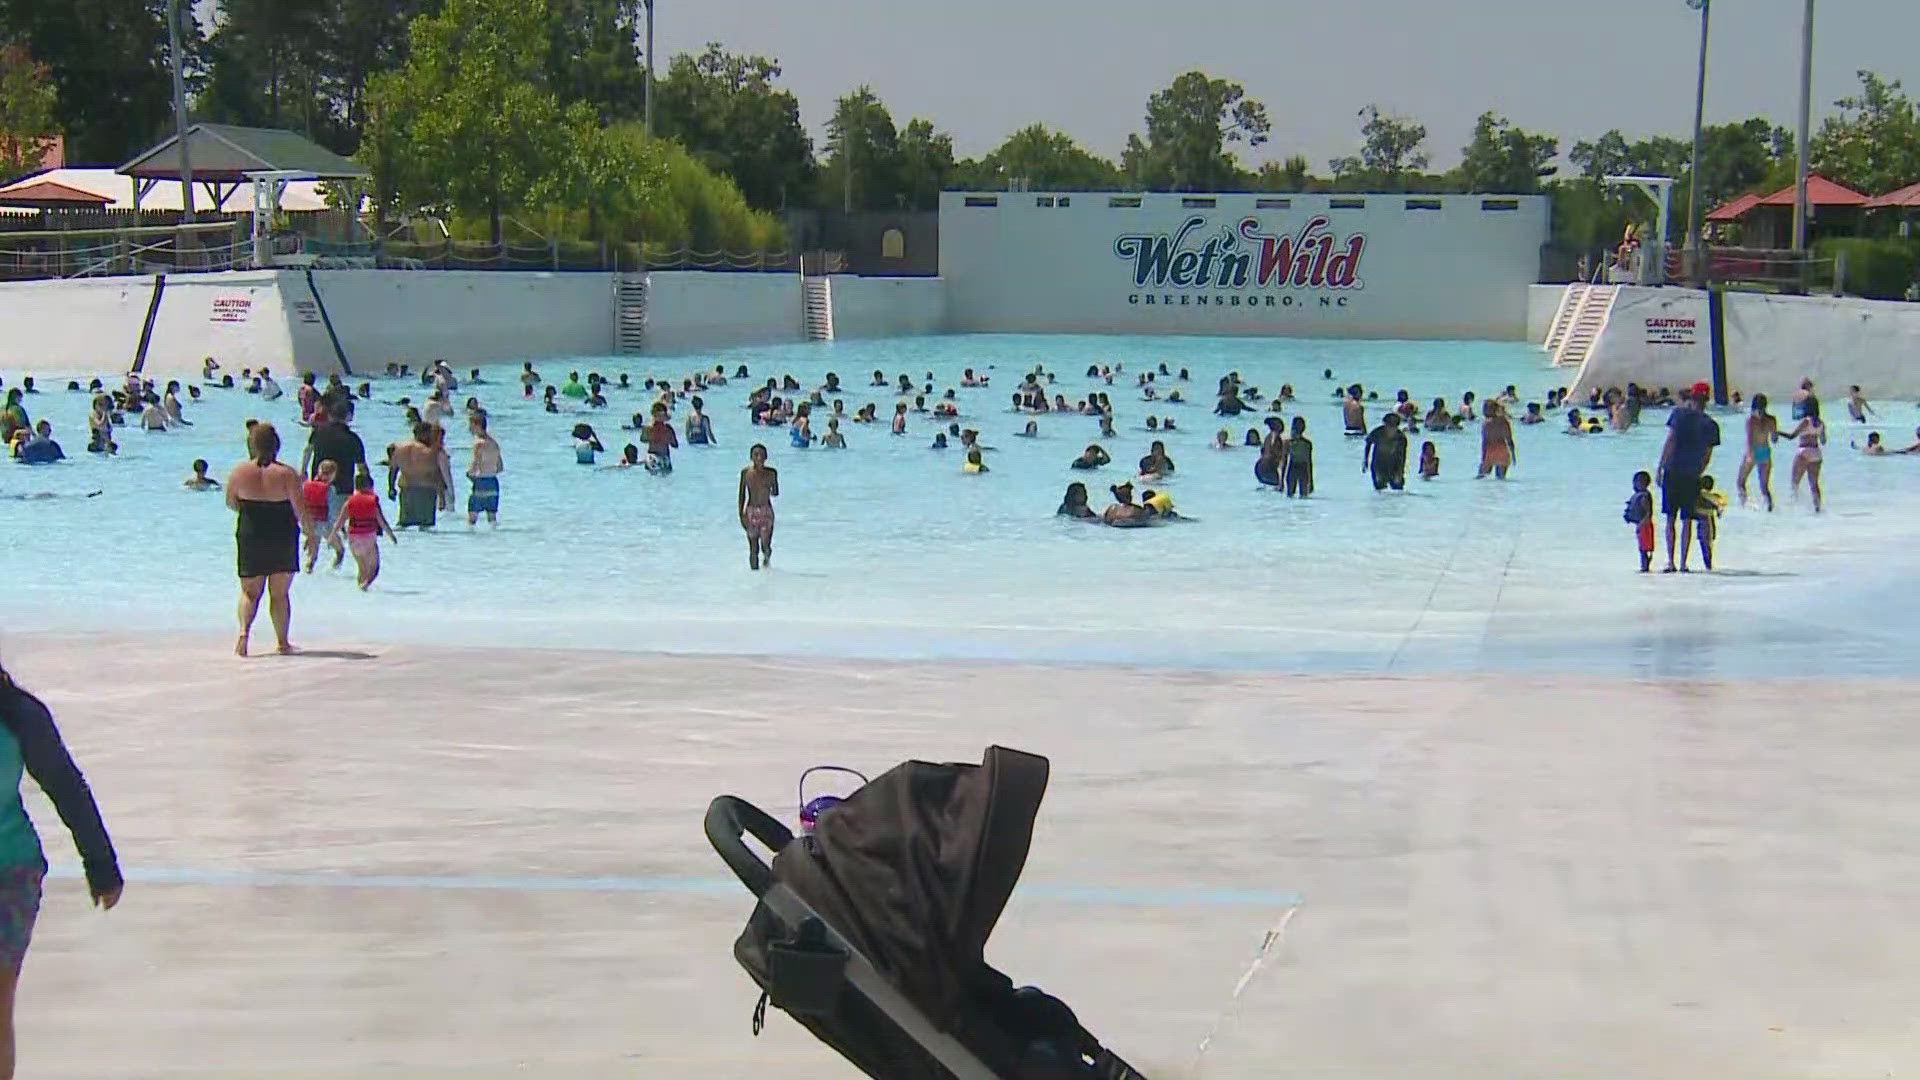 Wet n wild helps community and staff beat the heat.